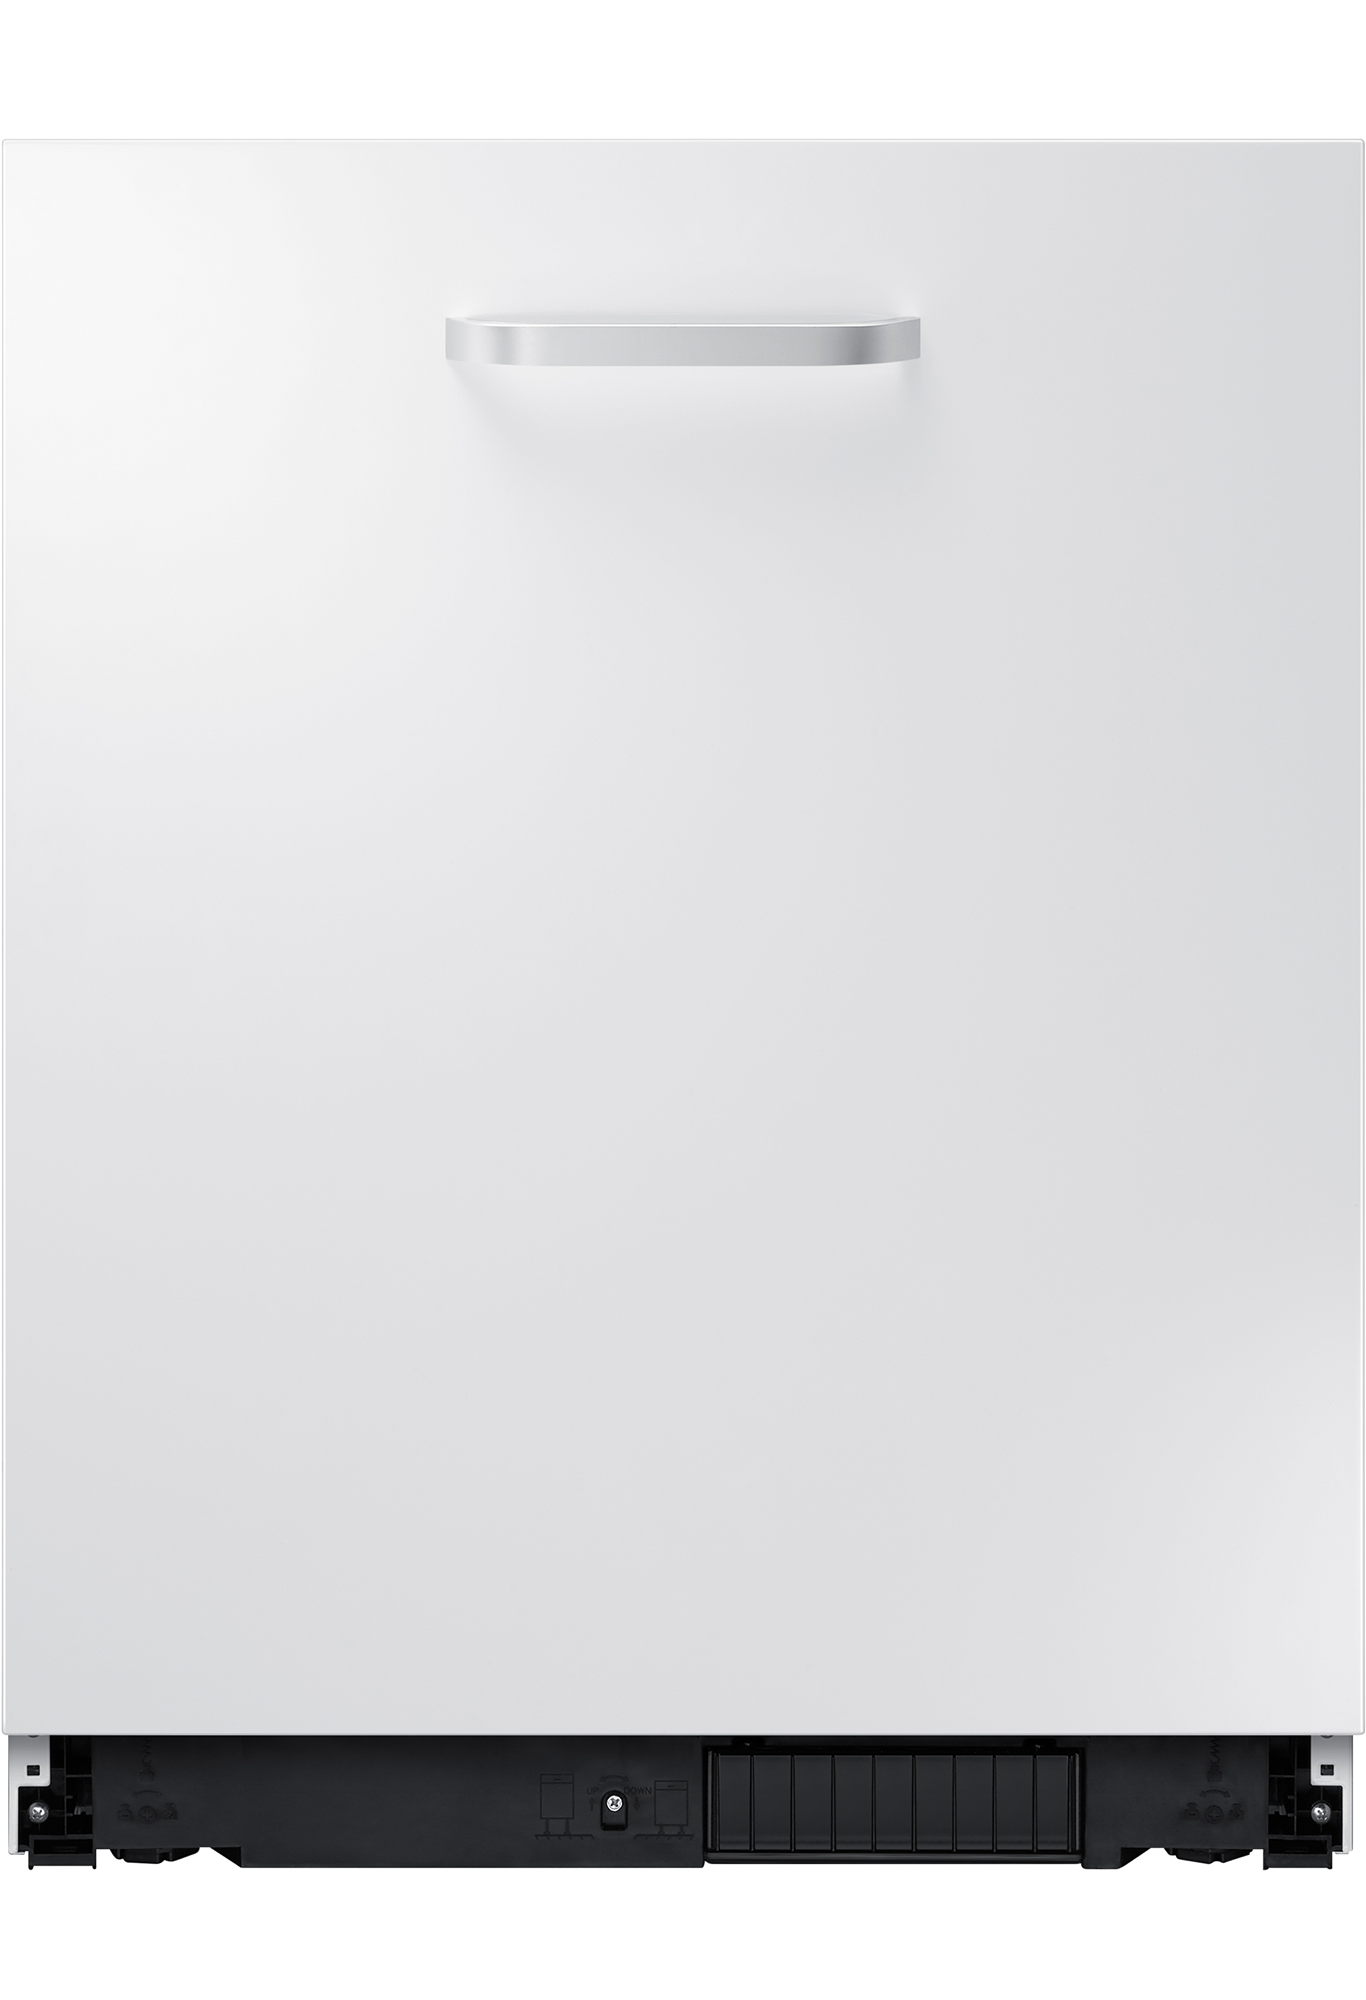 SAMSUNG Fully Integrated Dishwasher With 13 Place Settings